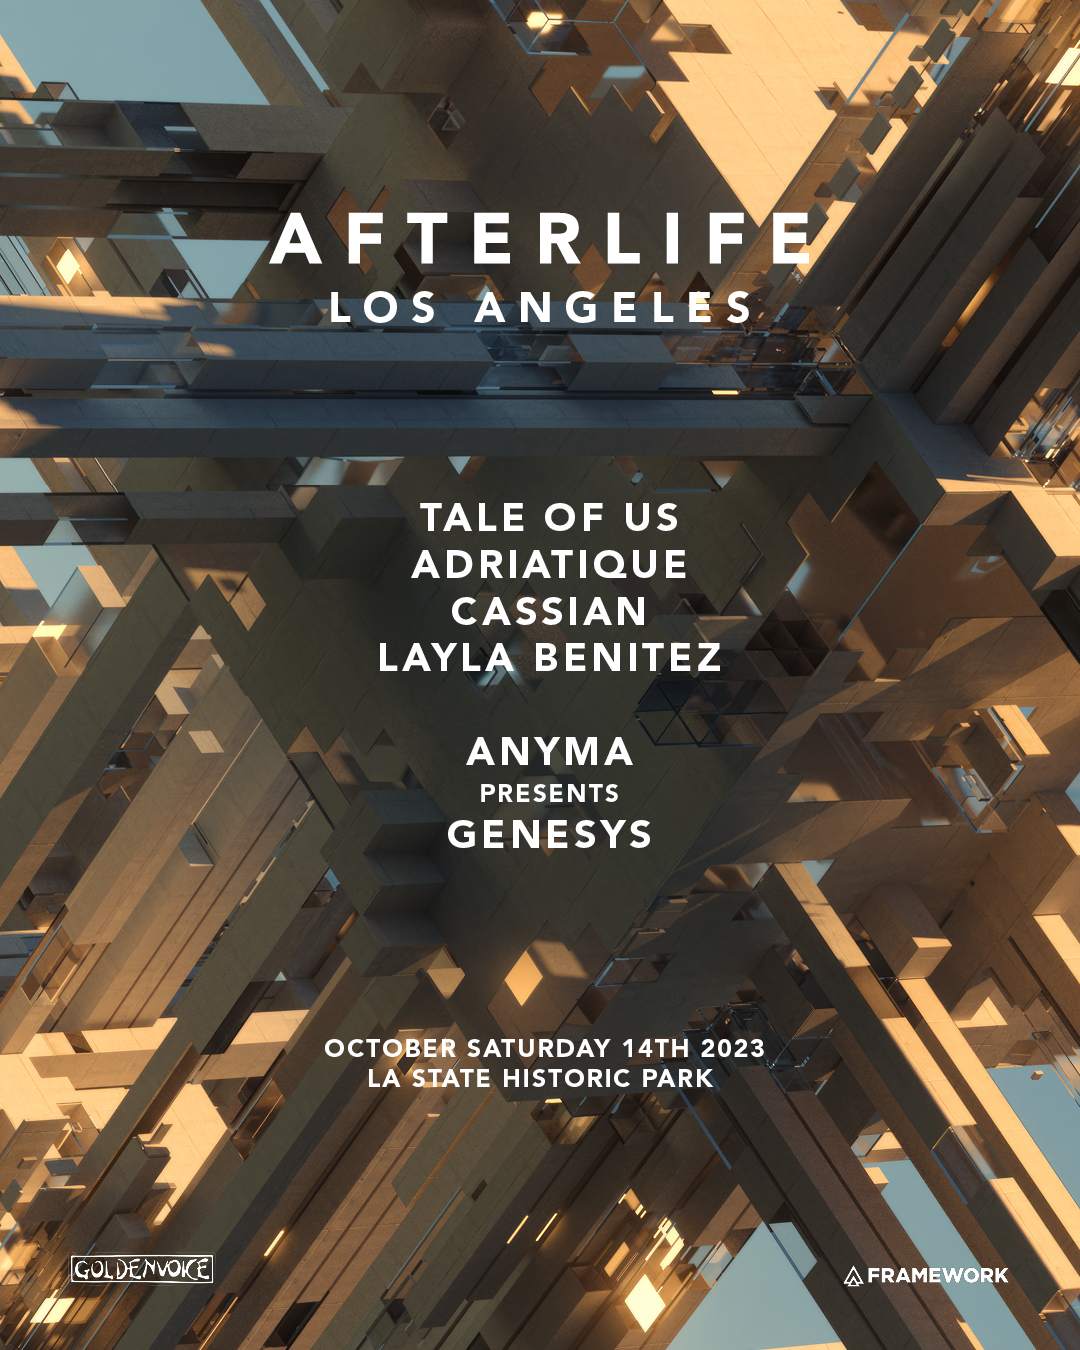 Afterlife Los Ángeles 🔥🌴 October 13th and 14th. @taleofus @anyma  @mrak_ofc @argyofficial @adriatique @cassian @laylabenitez…